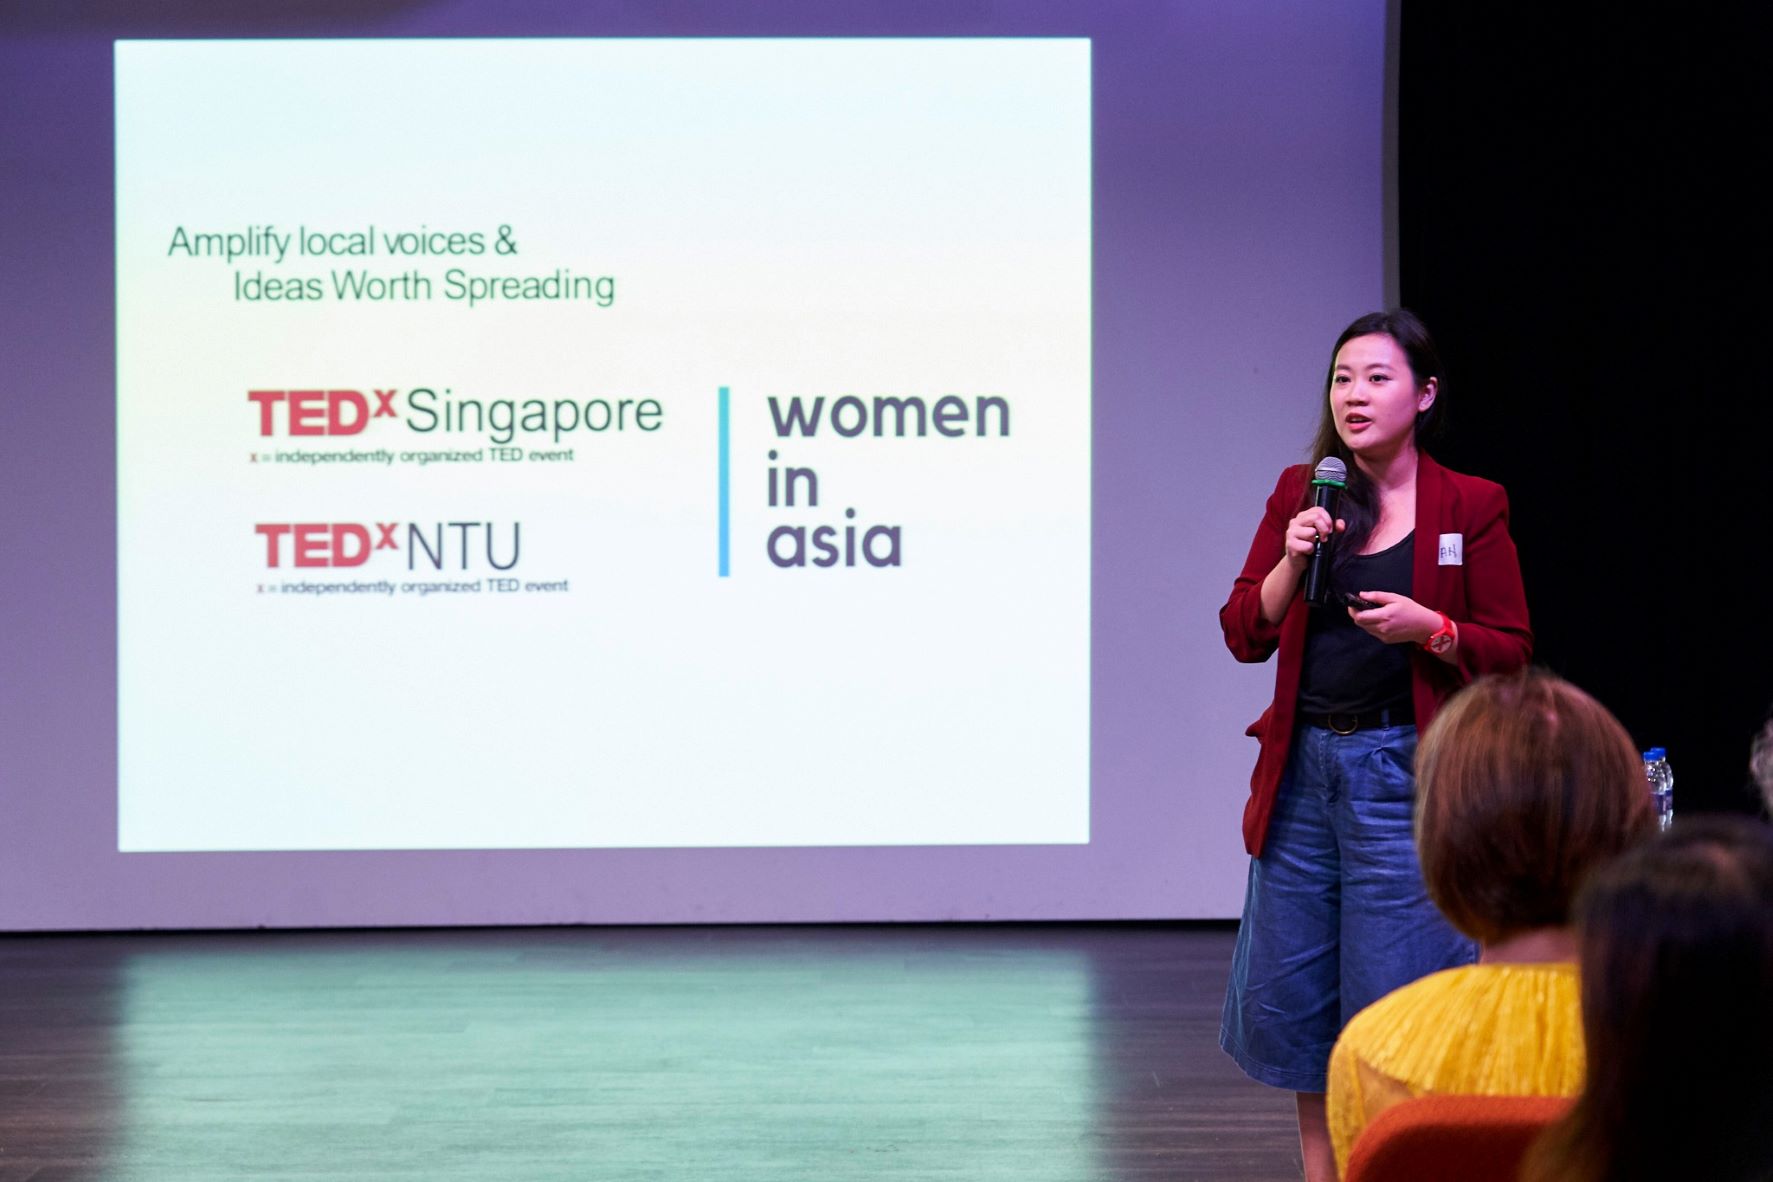 Ms Vivian Lim sharing about her work at Women In Asia, TEDxSingapore and TEDxNTU.